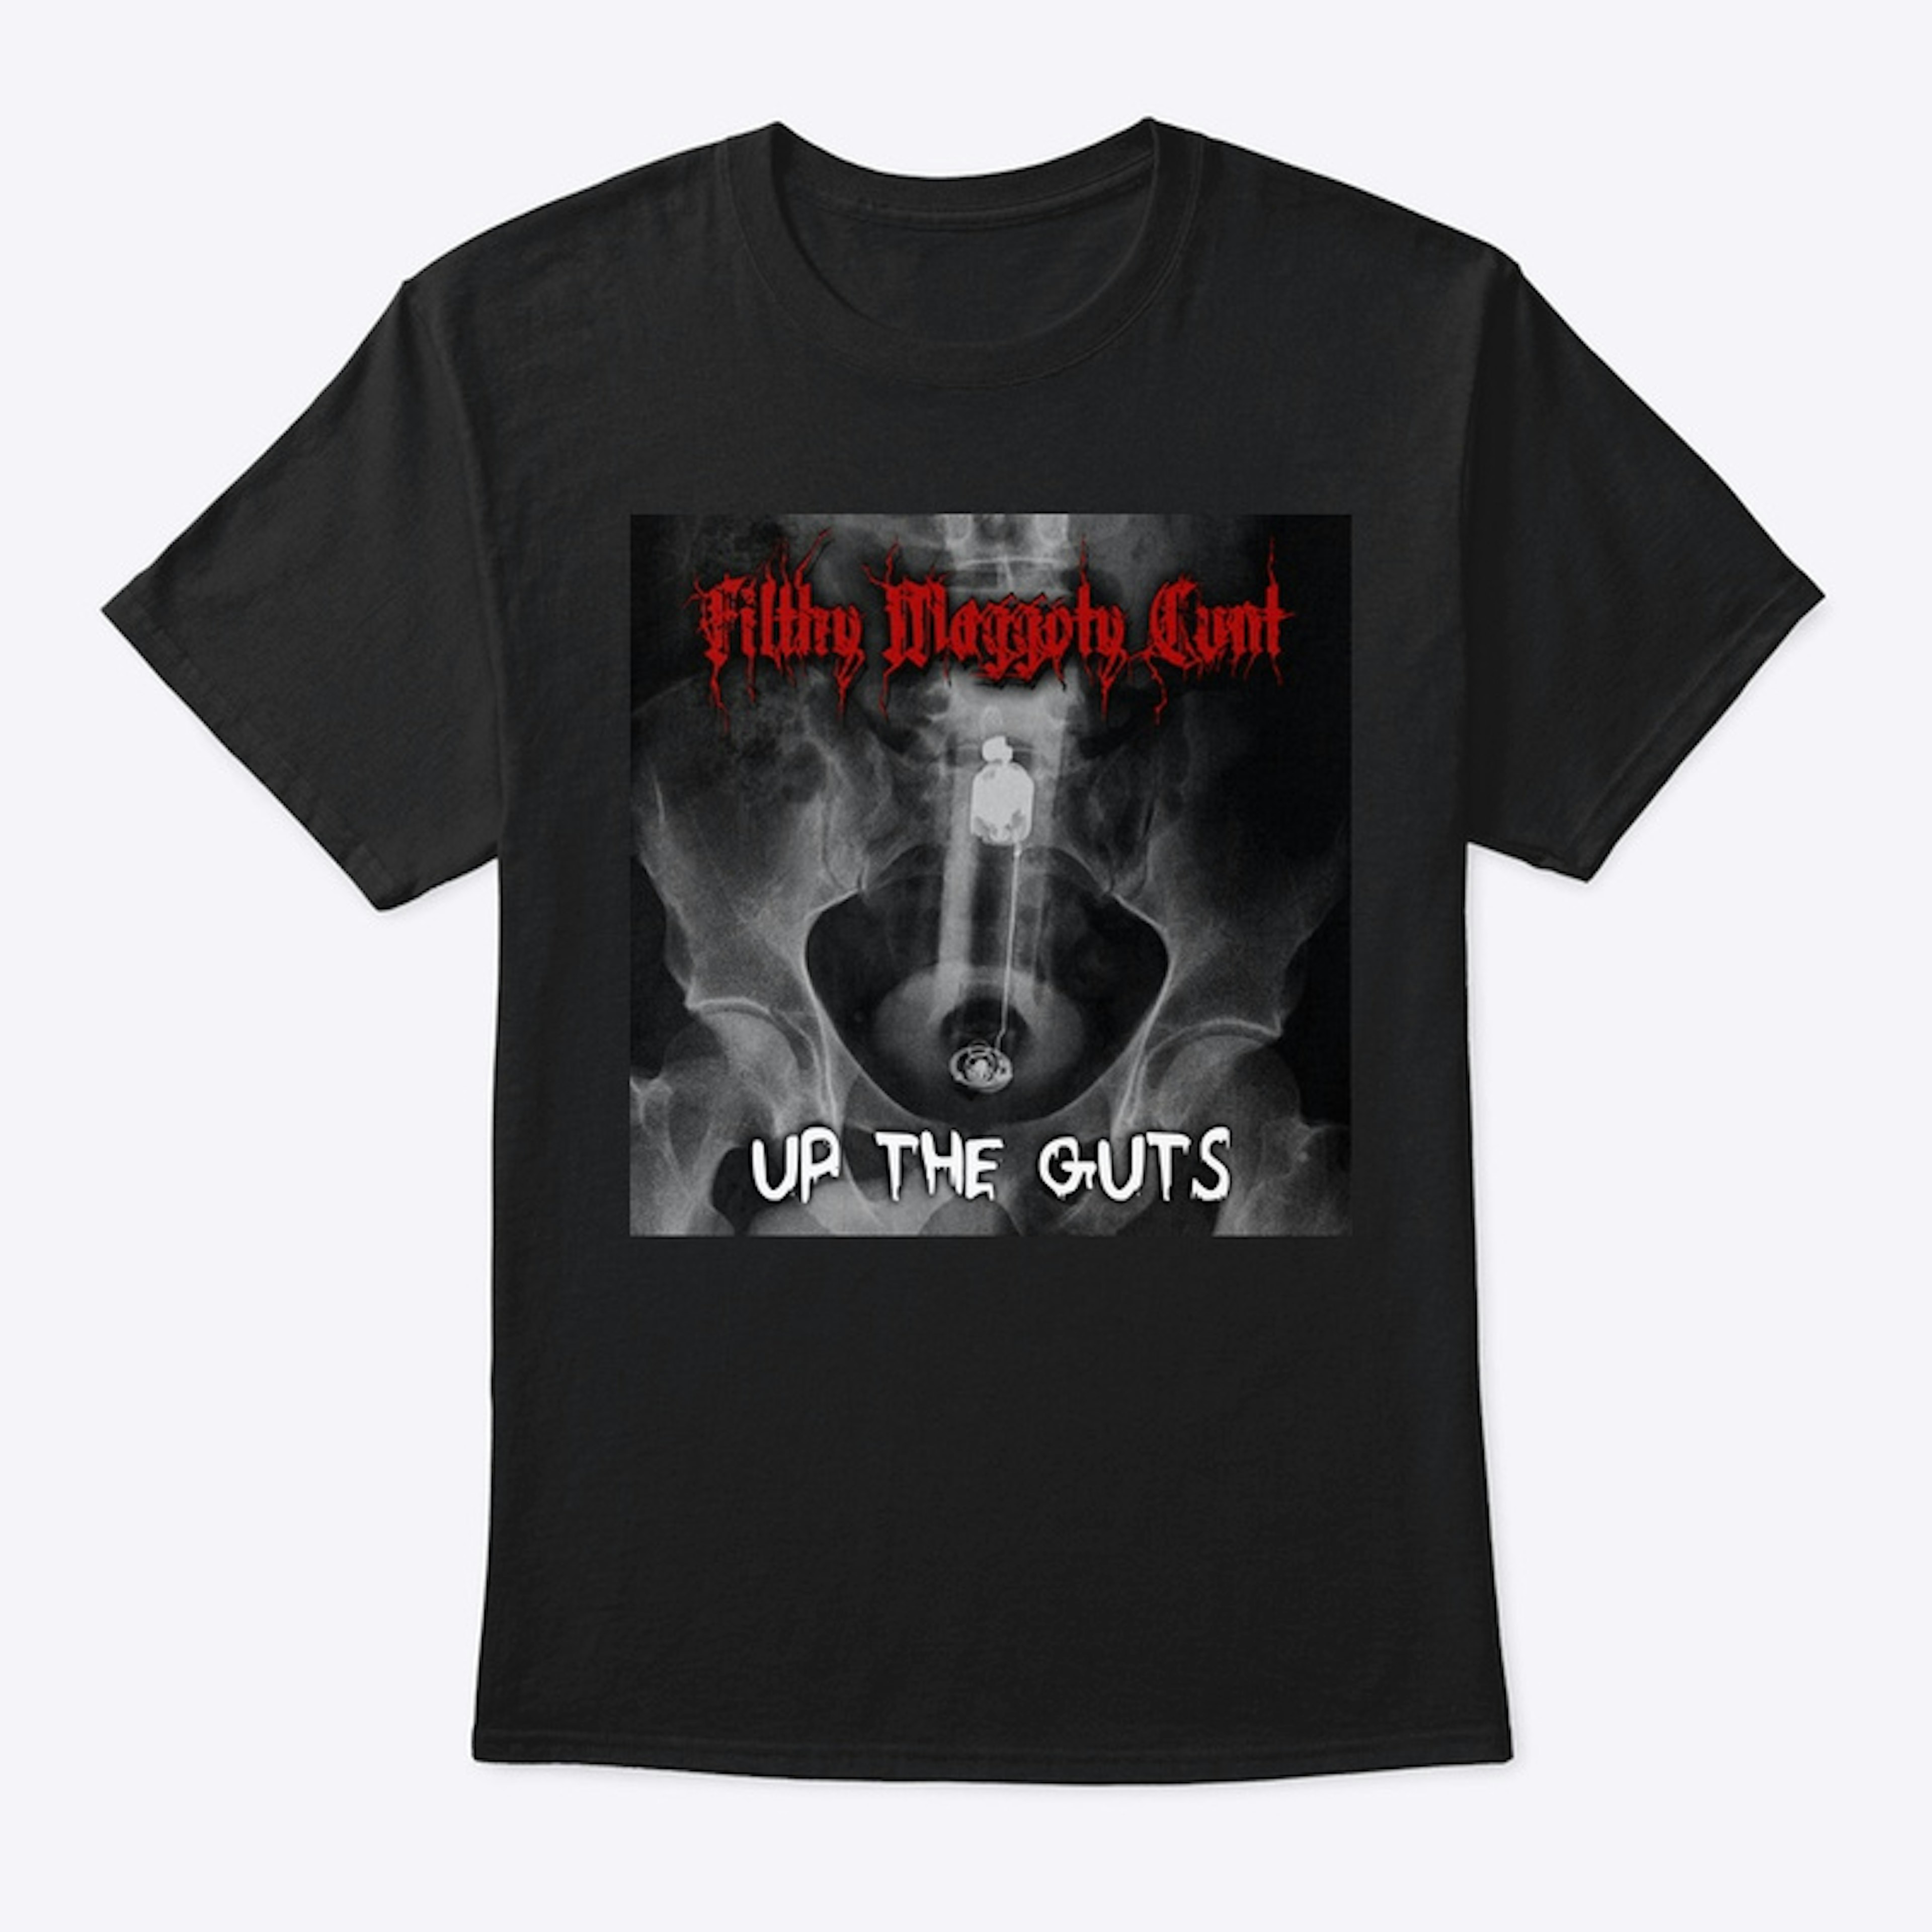 FMC - Up The Guts